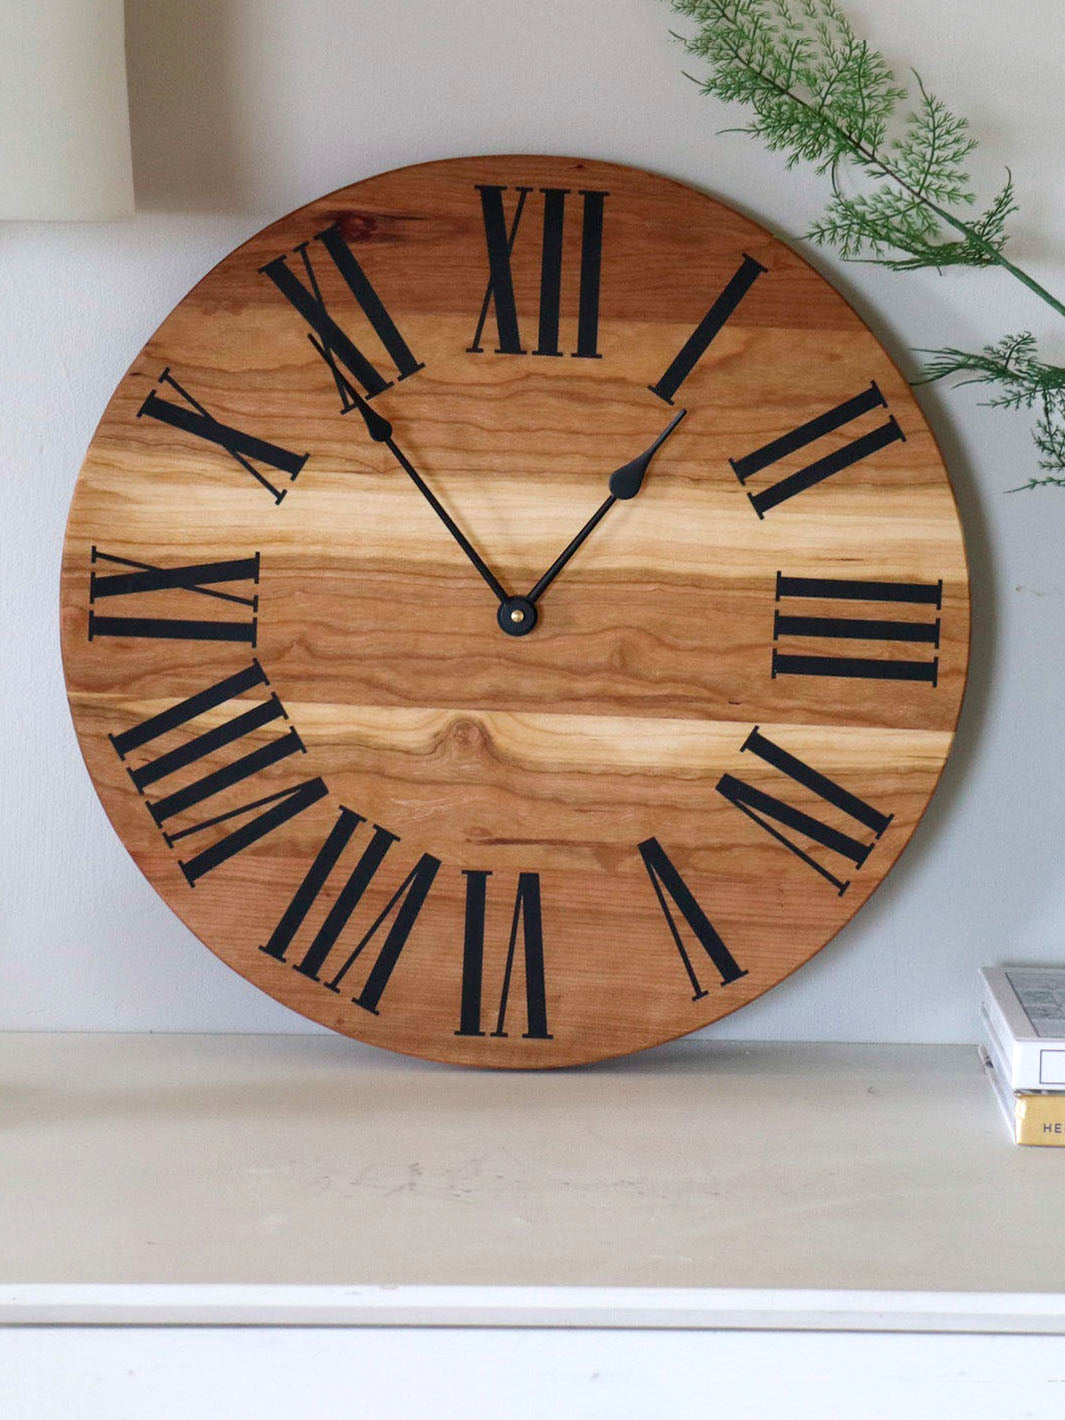 Sappy 18" Solid Cherry Hardwood Wall Clock with Black Roman Numerals (in stock) Earthly Comfort Clocks 2127-5